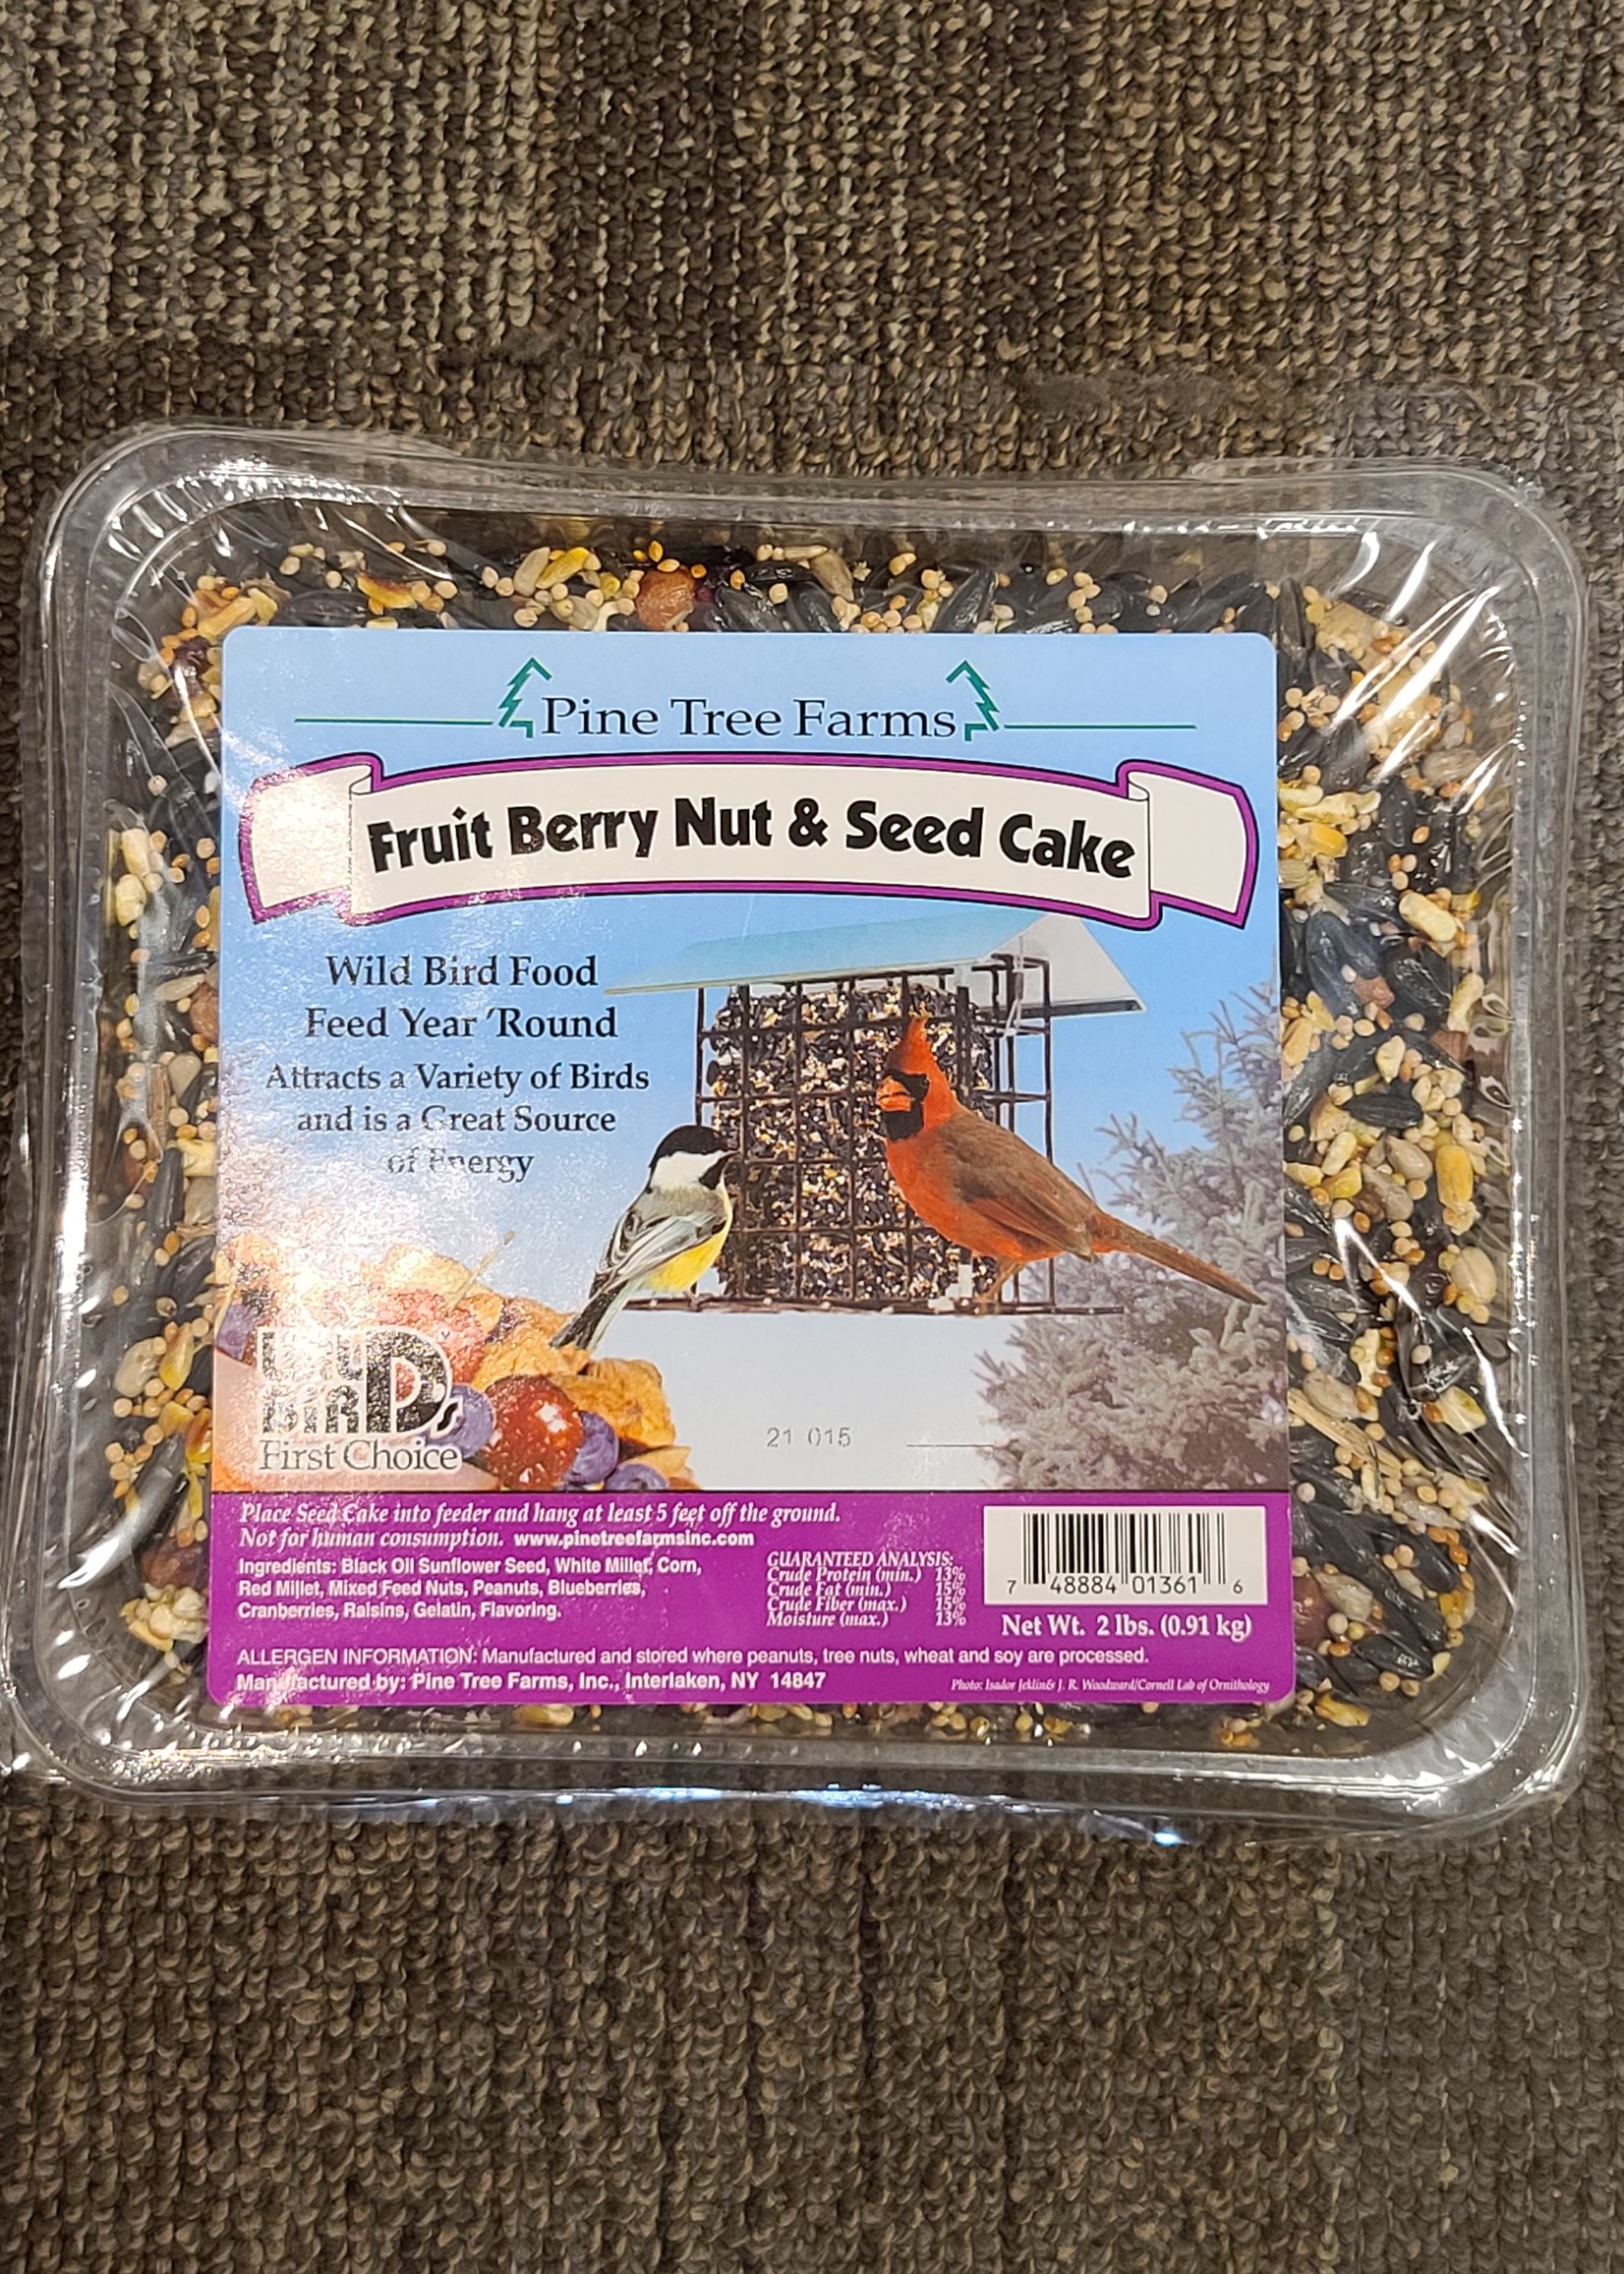 Fruit Berry Nut and Seed Cake